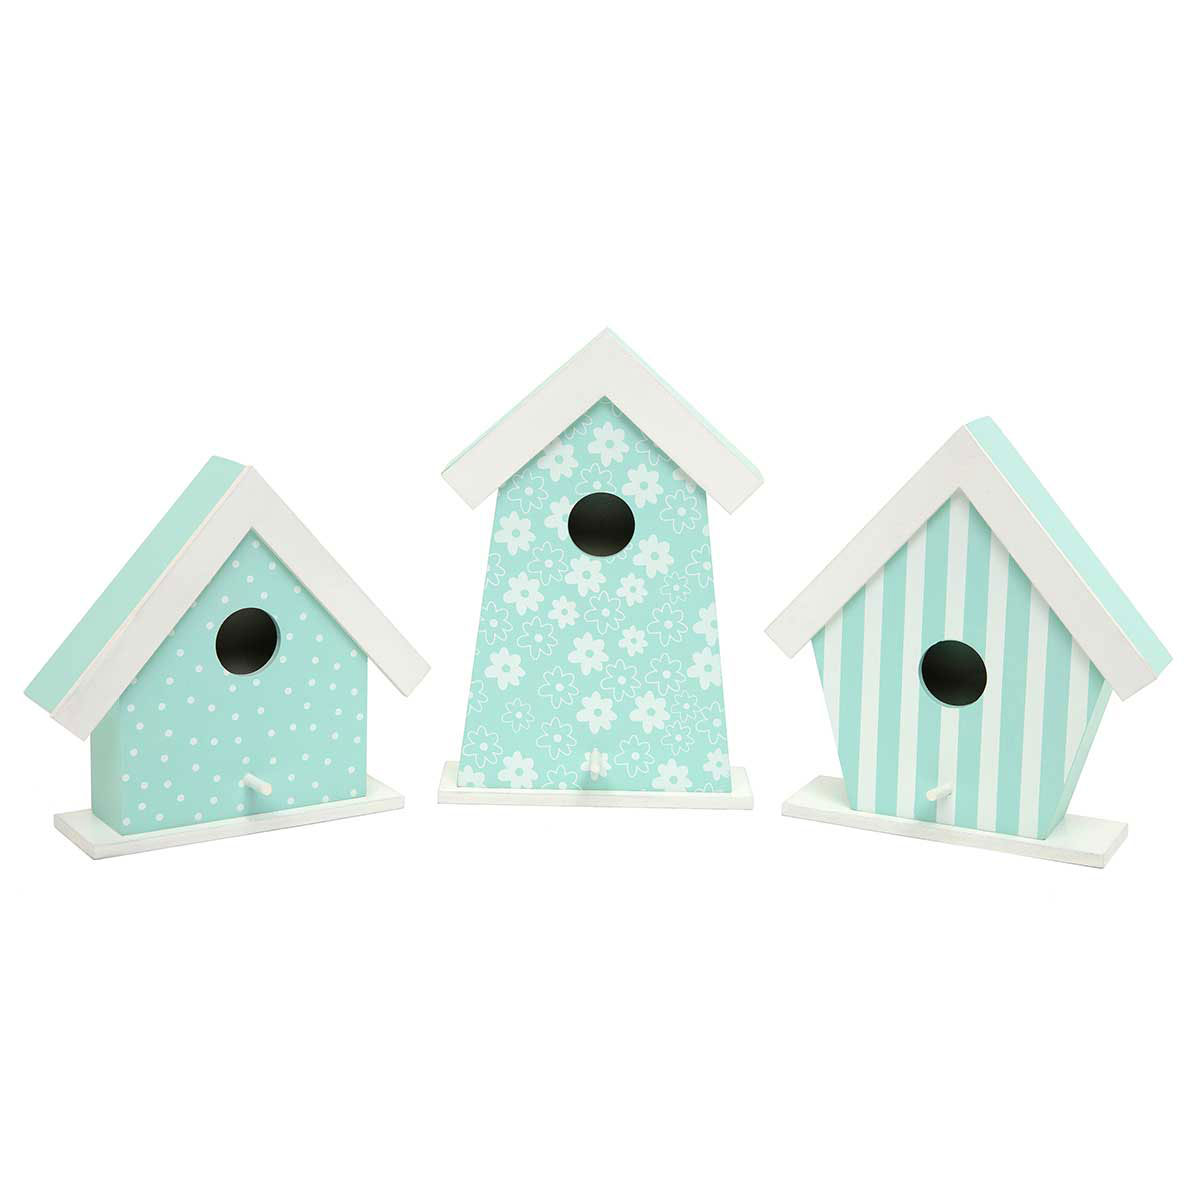 b50 BIRDHOUSE BLUE MEADOW FLORAL 5.75IN X 2.75IN X 8.5IN WOOD - Click Image to Close